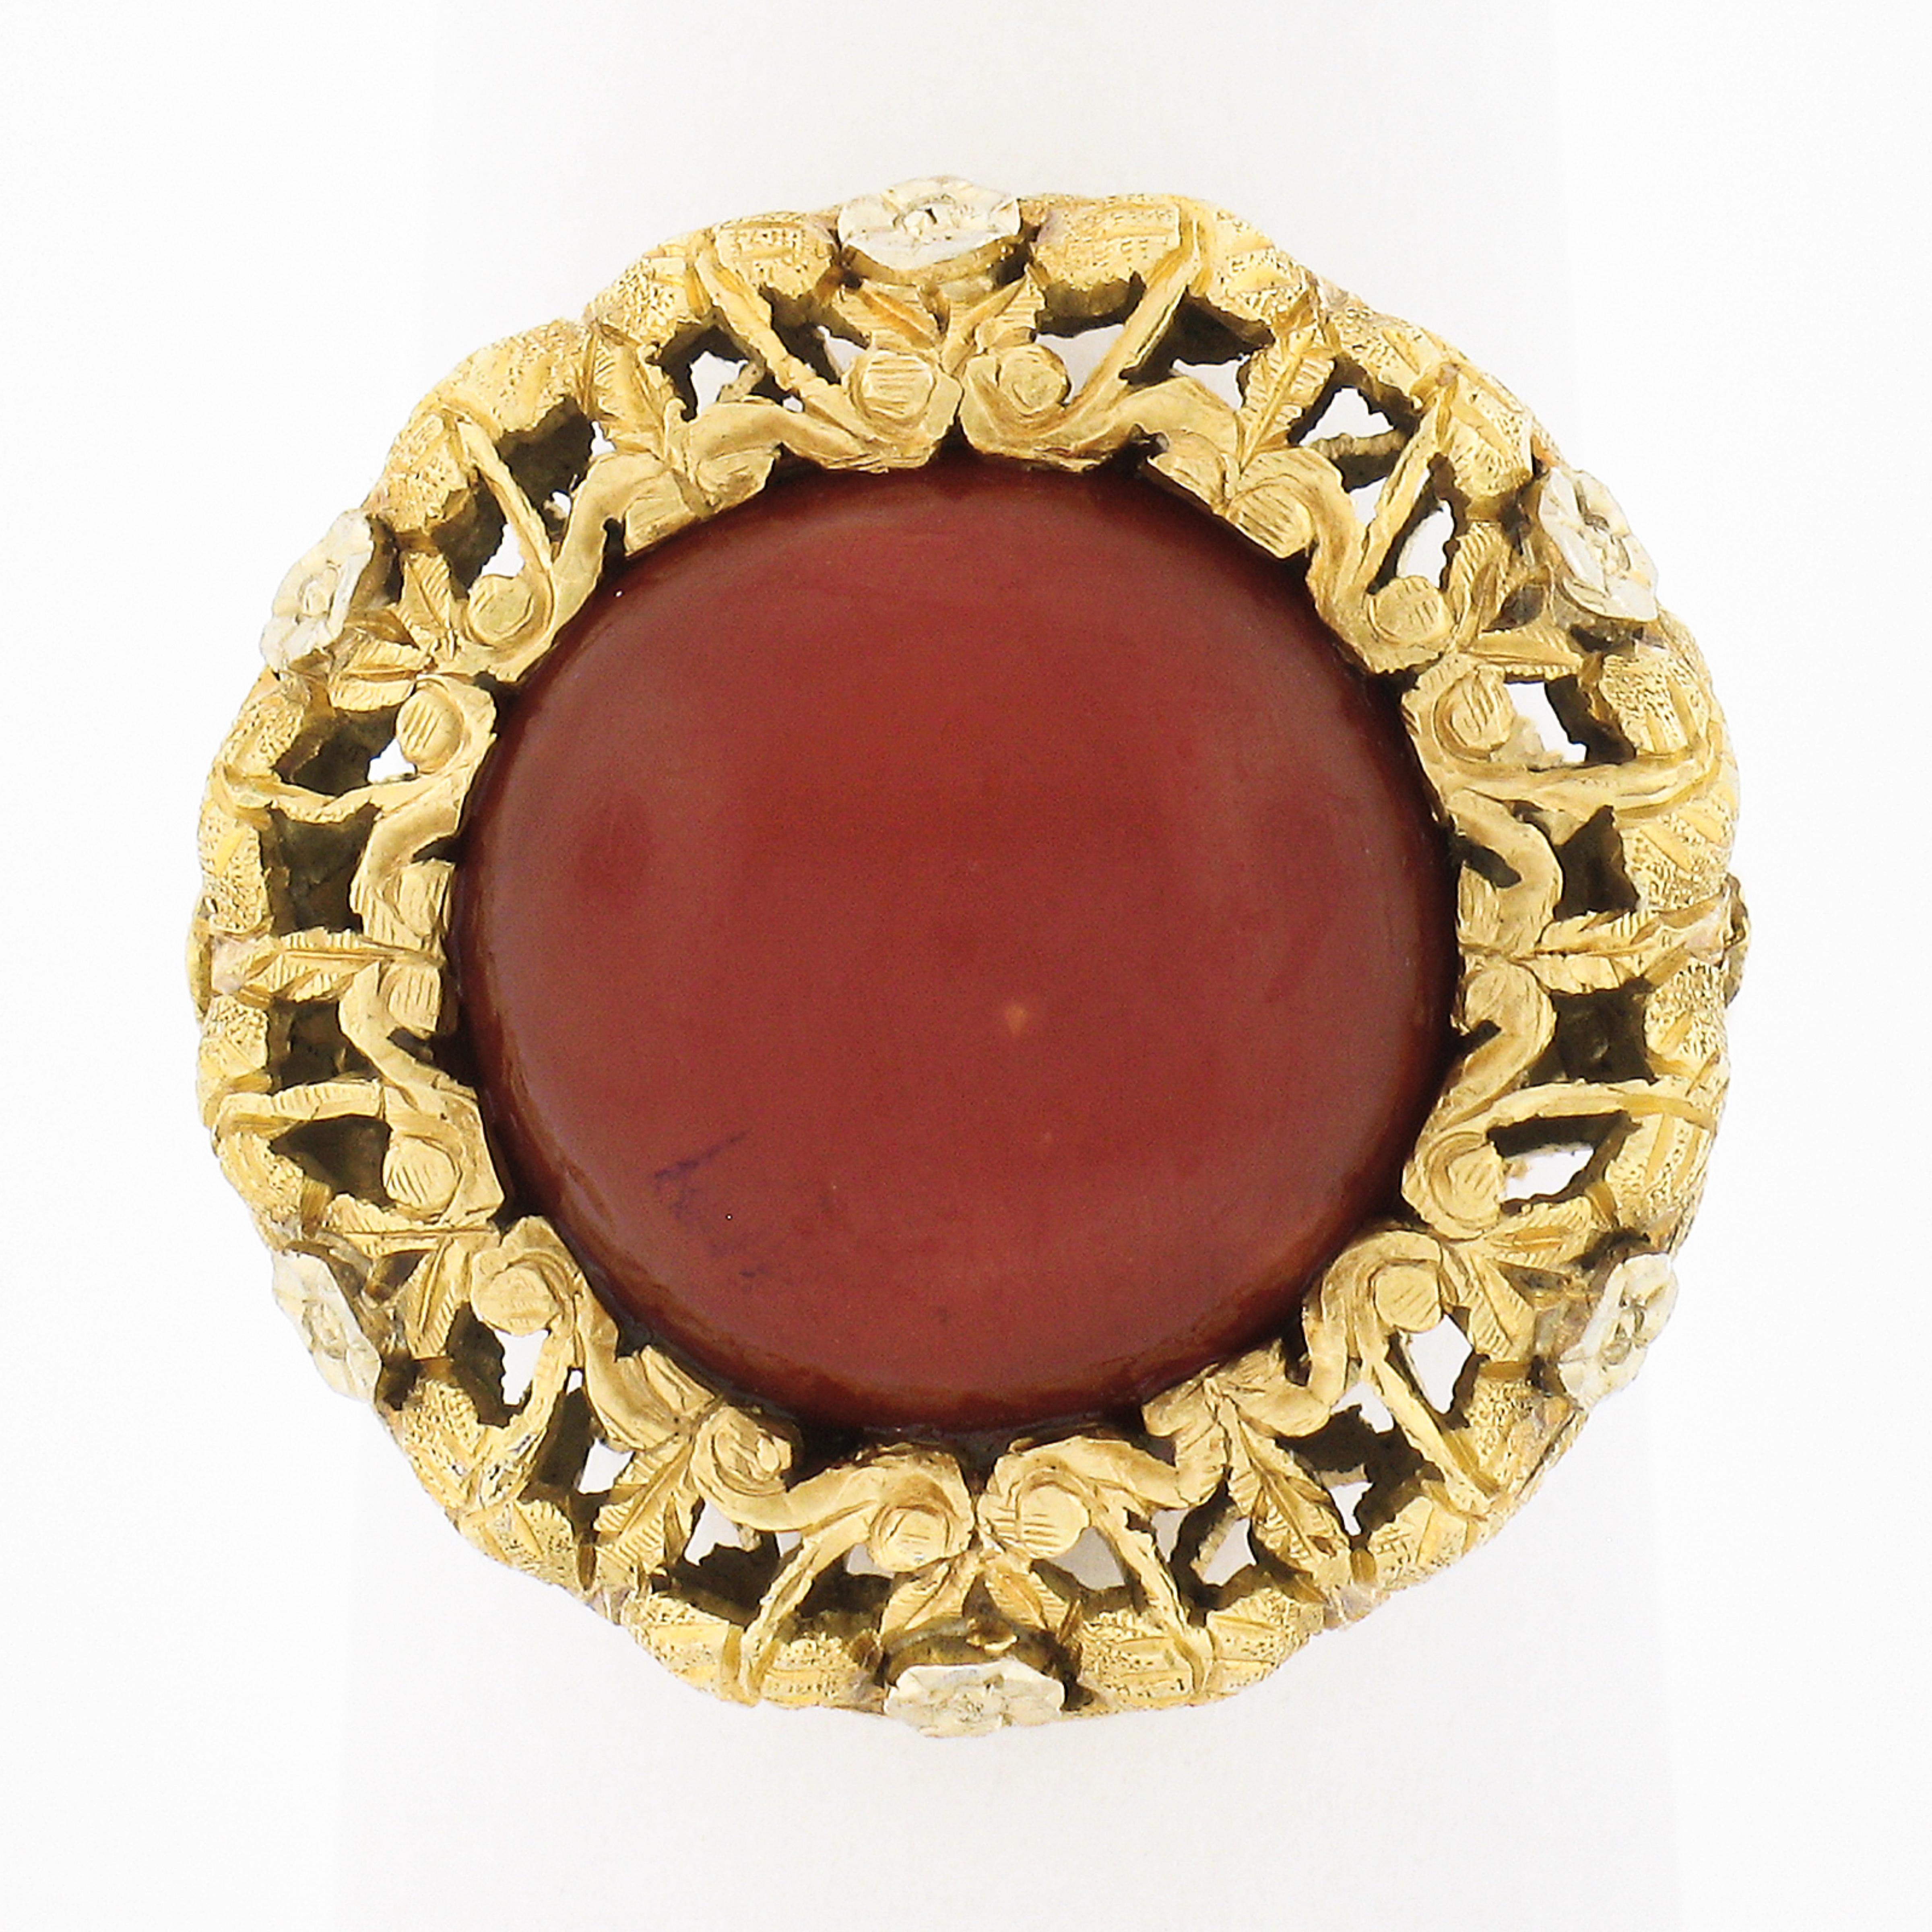 Here we have an absolutely beautiful vintage ring that is very well crafted from solid 18k yellow gold featuring a fine coral stone neatly set at its center. This round cabochon coral is GIA certified, showing a truly gorgeous and intense orangy-red